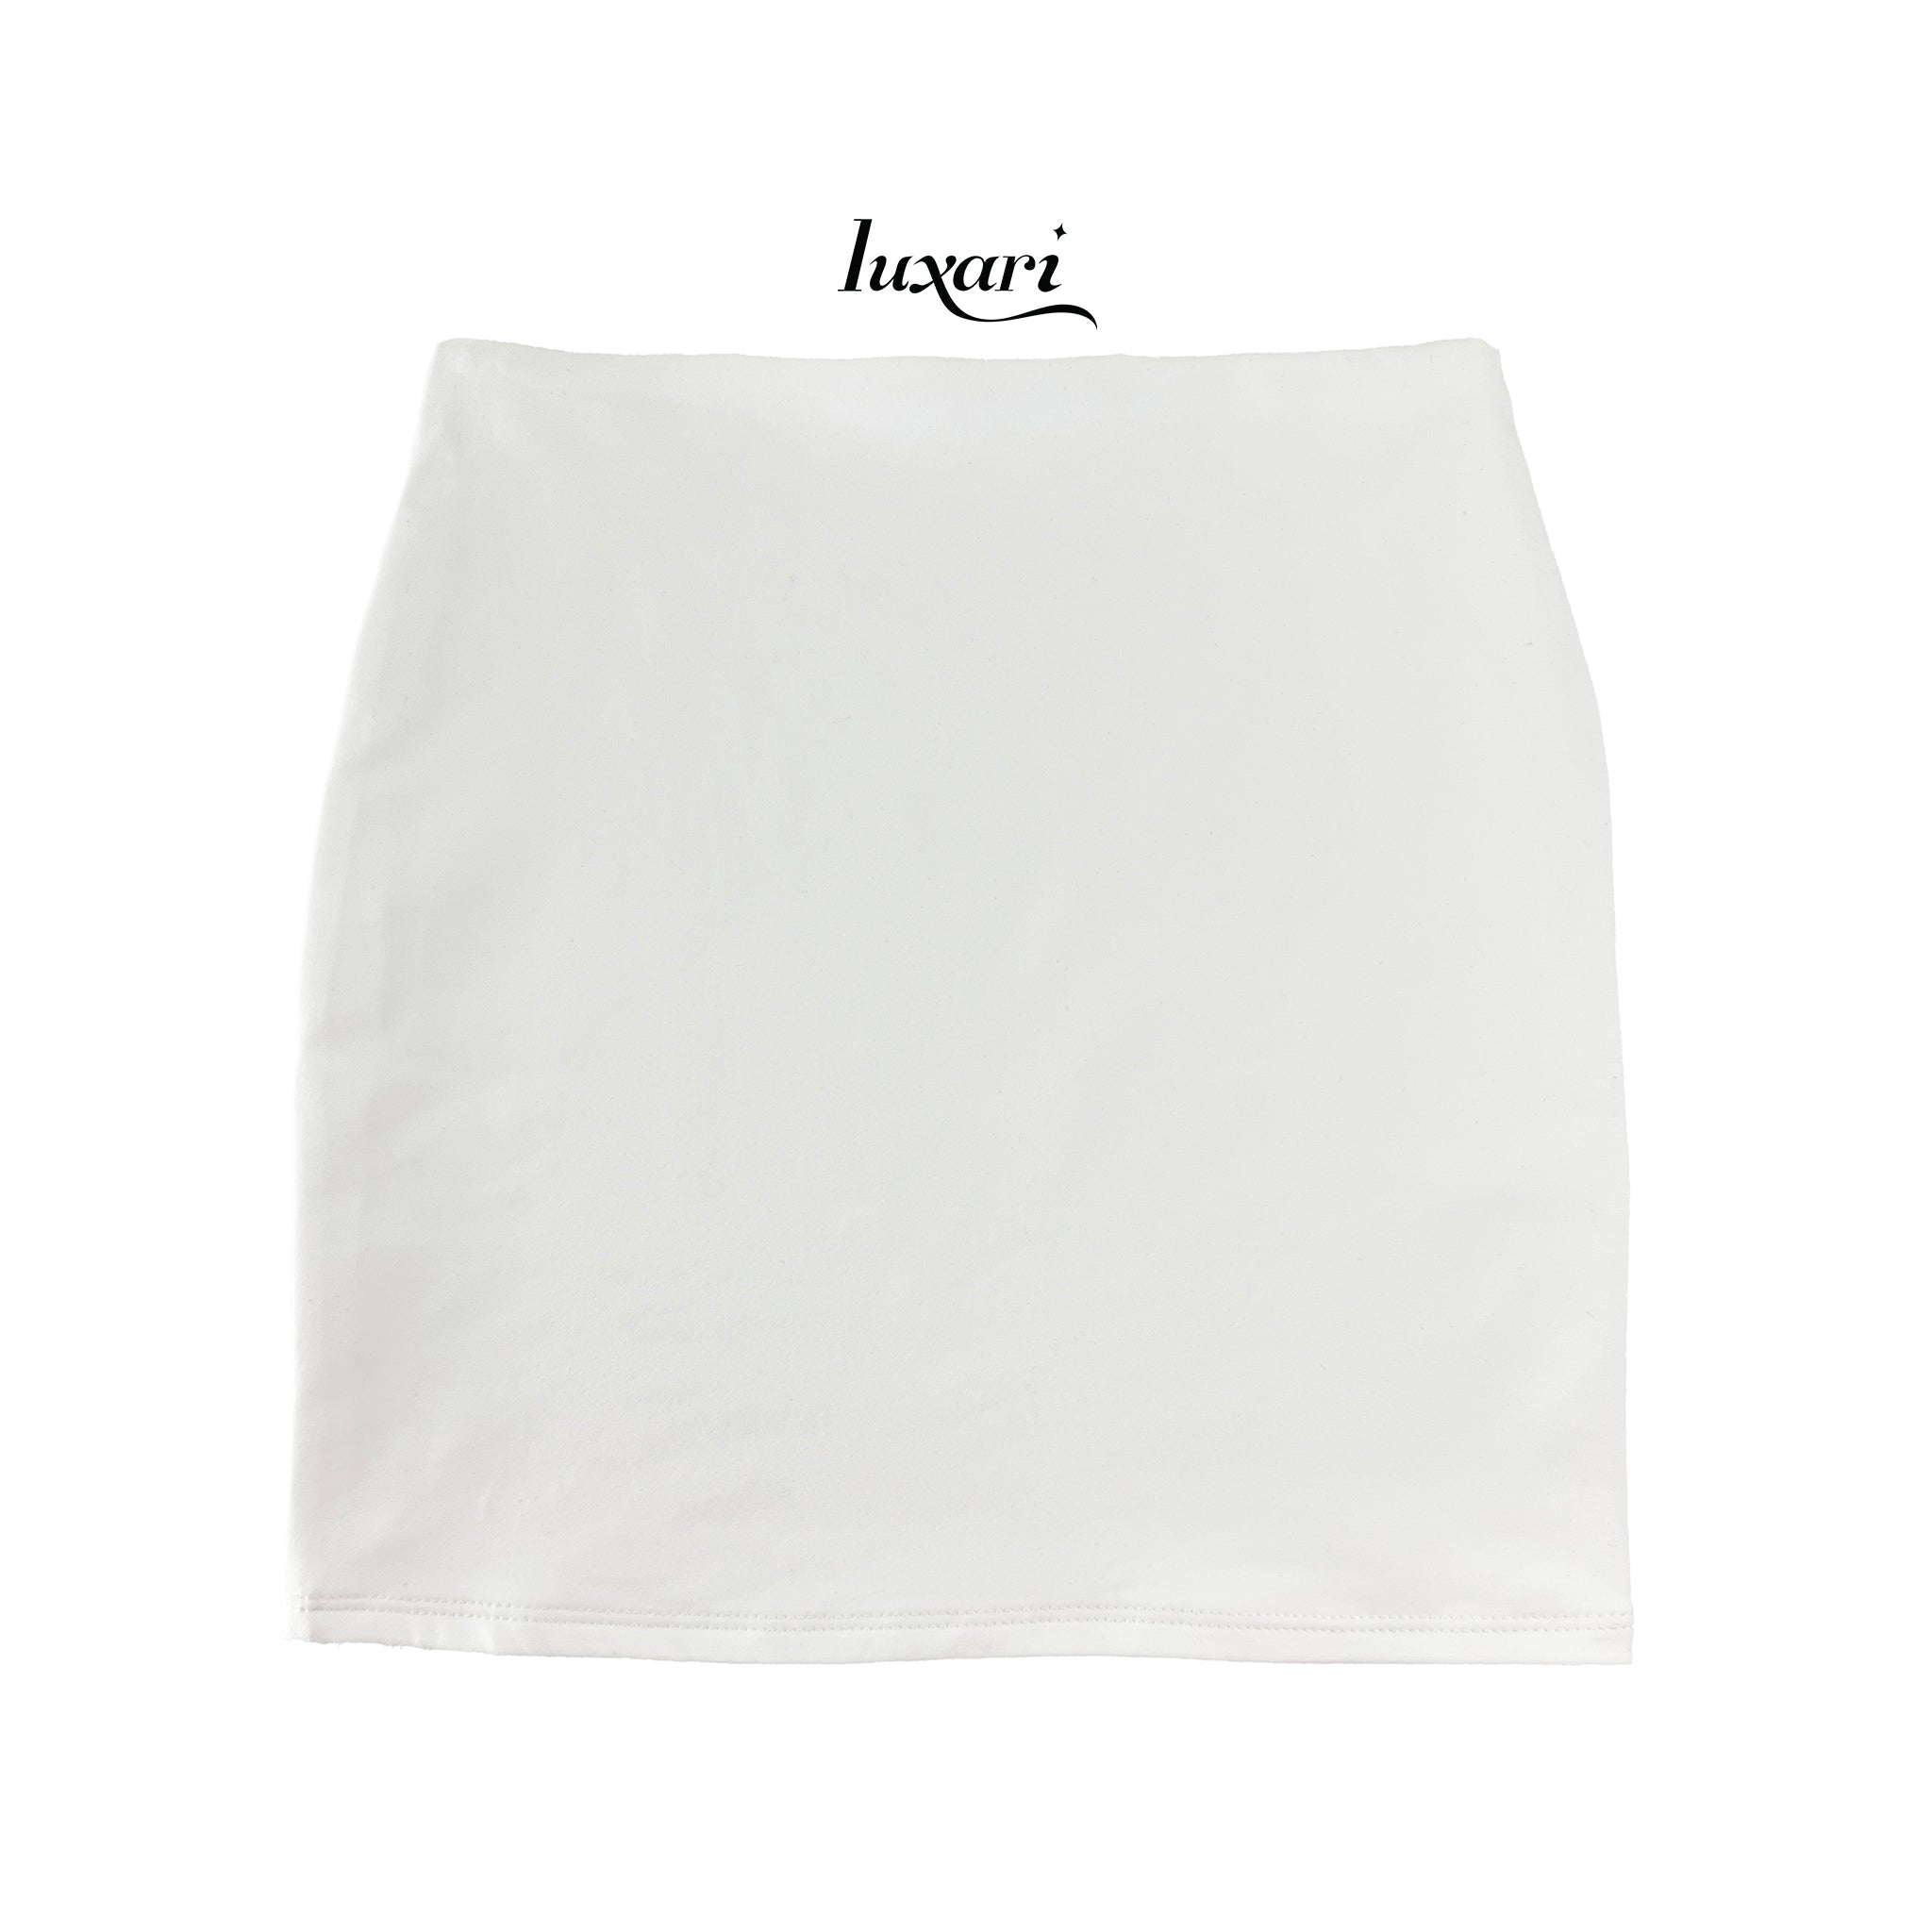 Buy Yuemengxuan Women's High Waisted Plain Pleated Skater Tennis School  Uniforms A-line Mini Skirt (White, Small) at Amazon.in